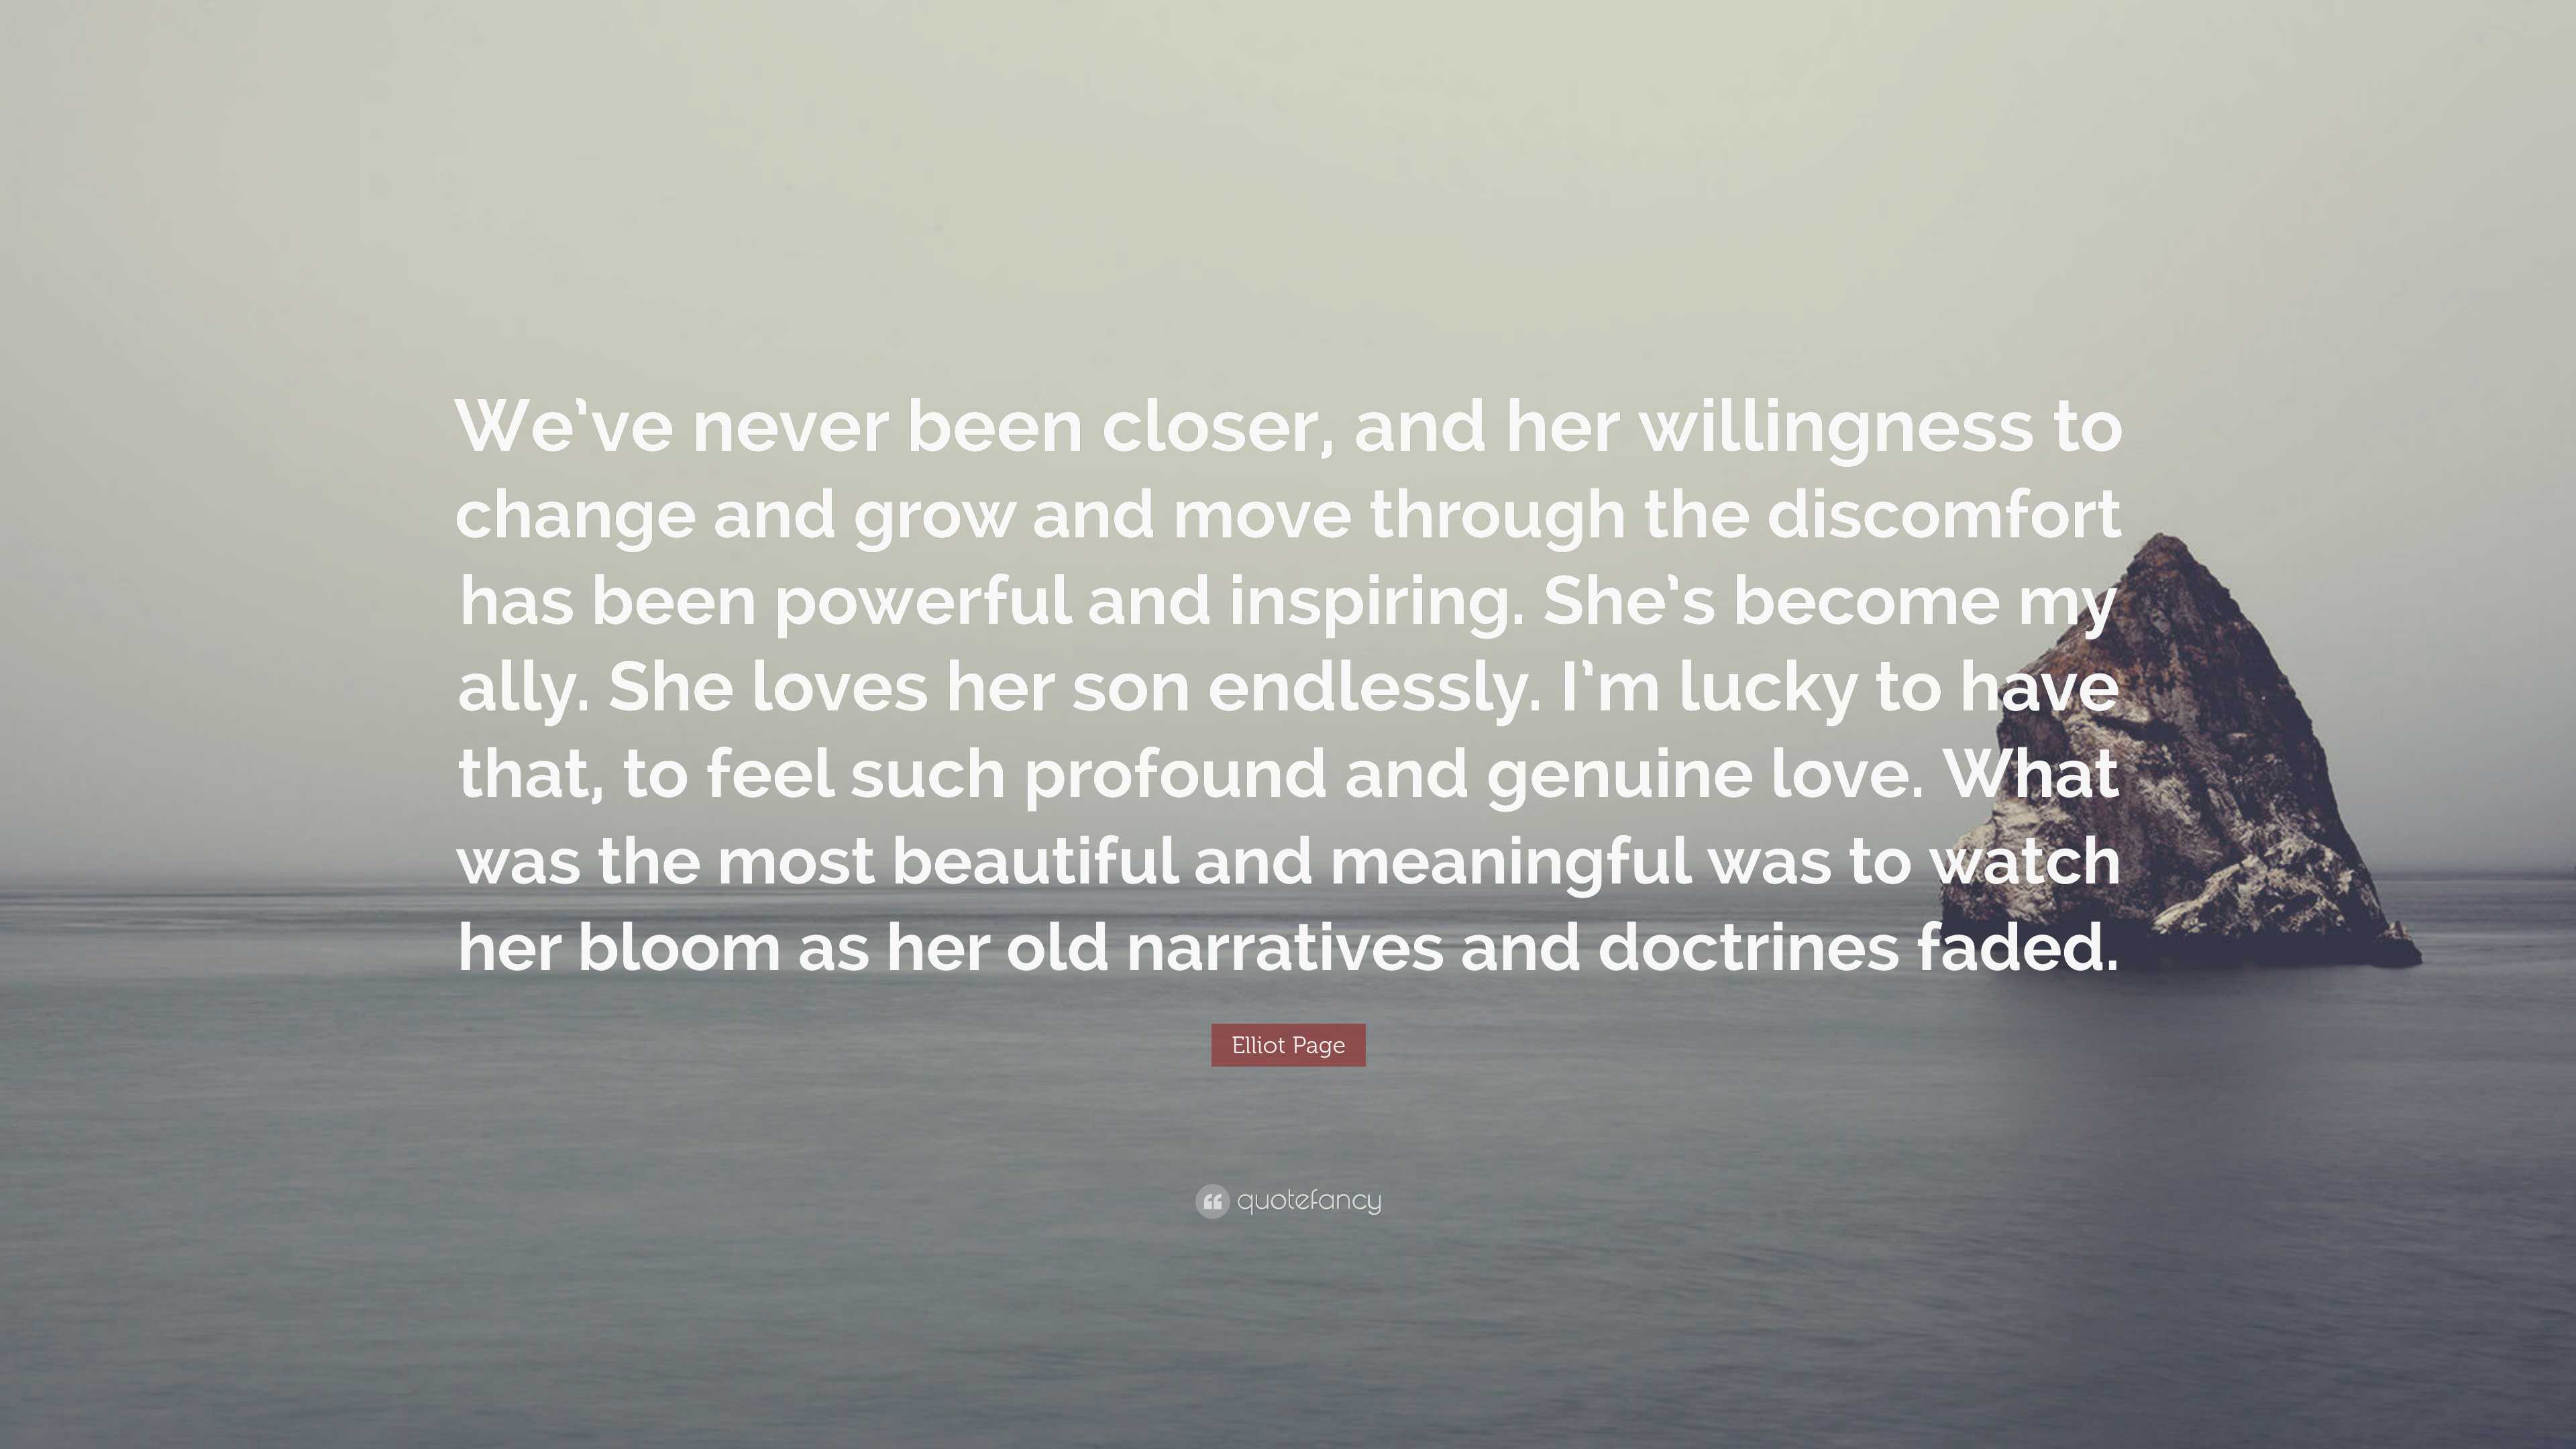 Elliot Page Quote: “We’ve never been closer, and her willingness to ...